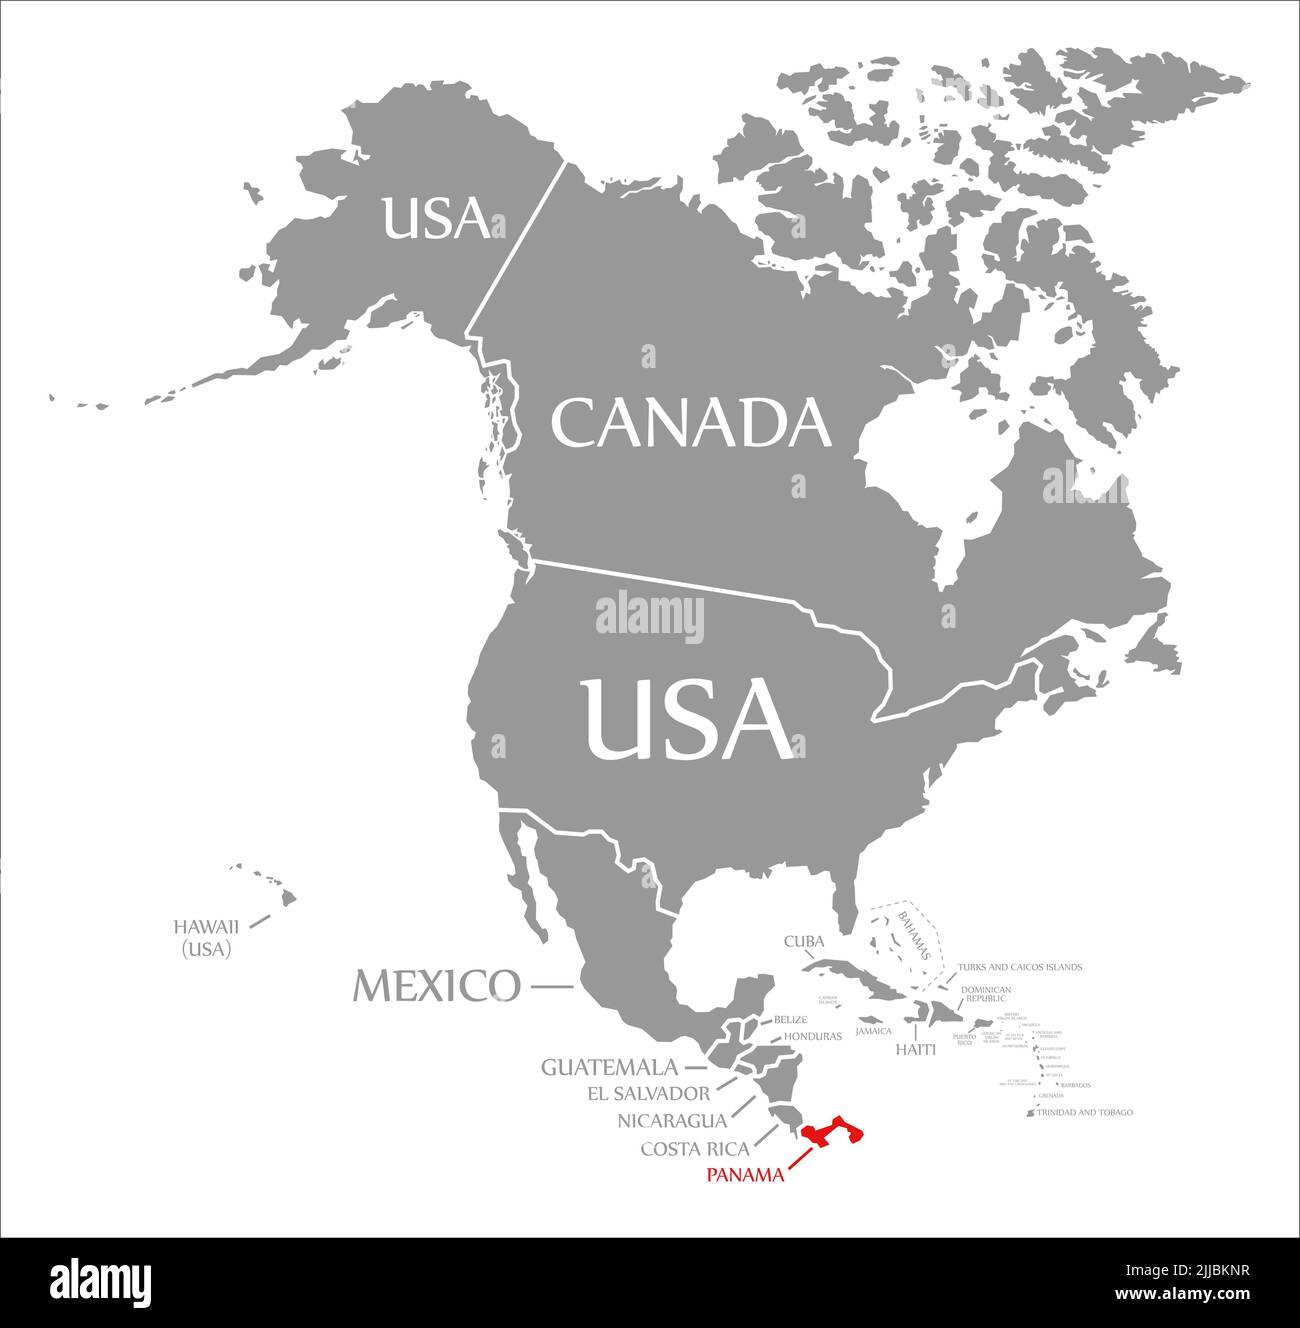 Panama red highlighted in map of North America Stock Photo